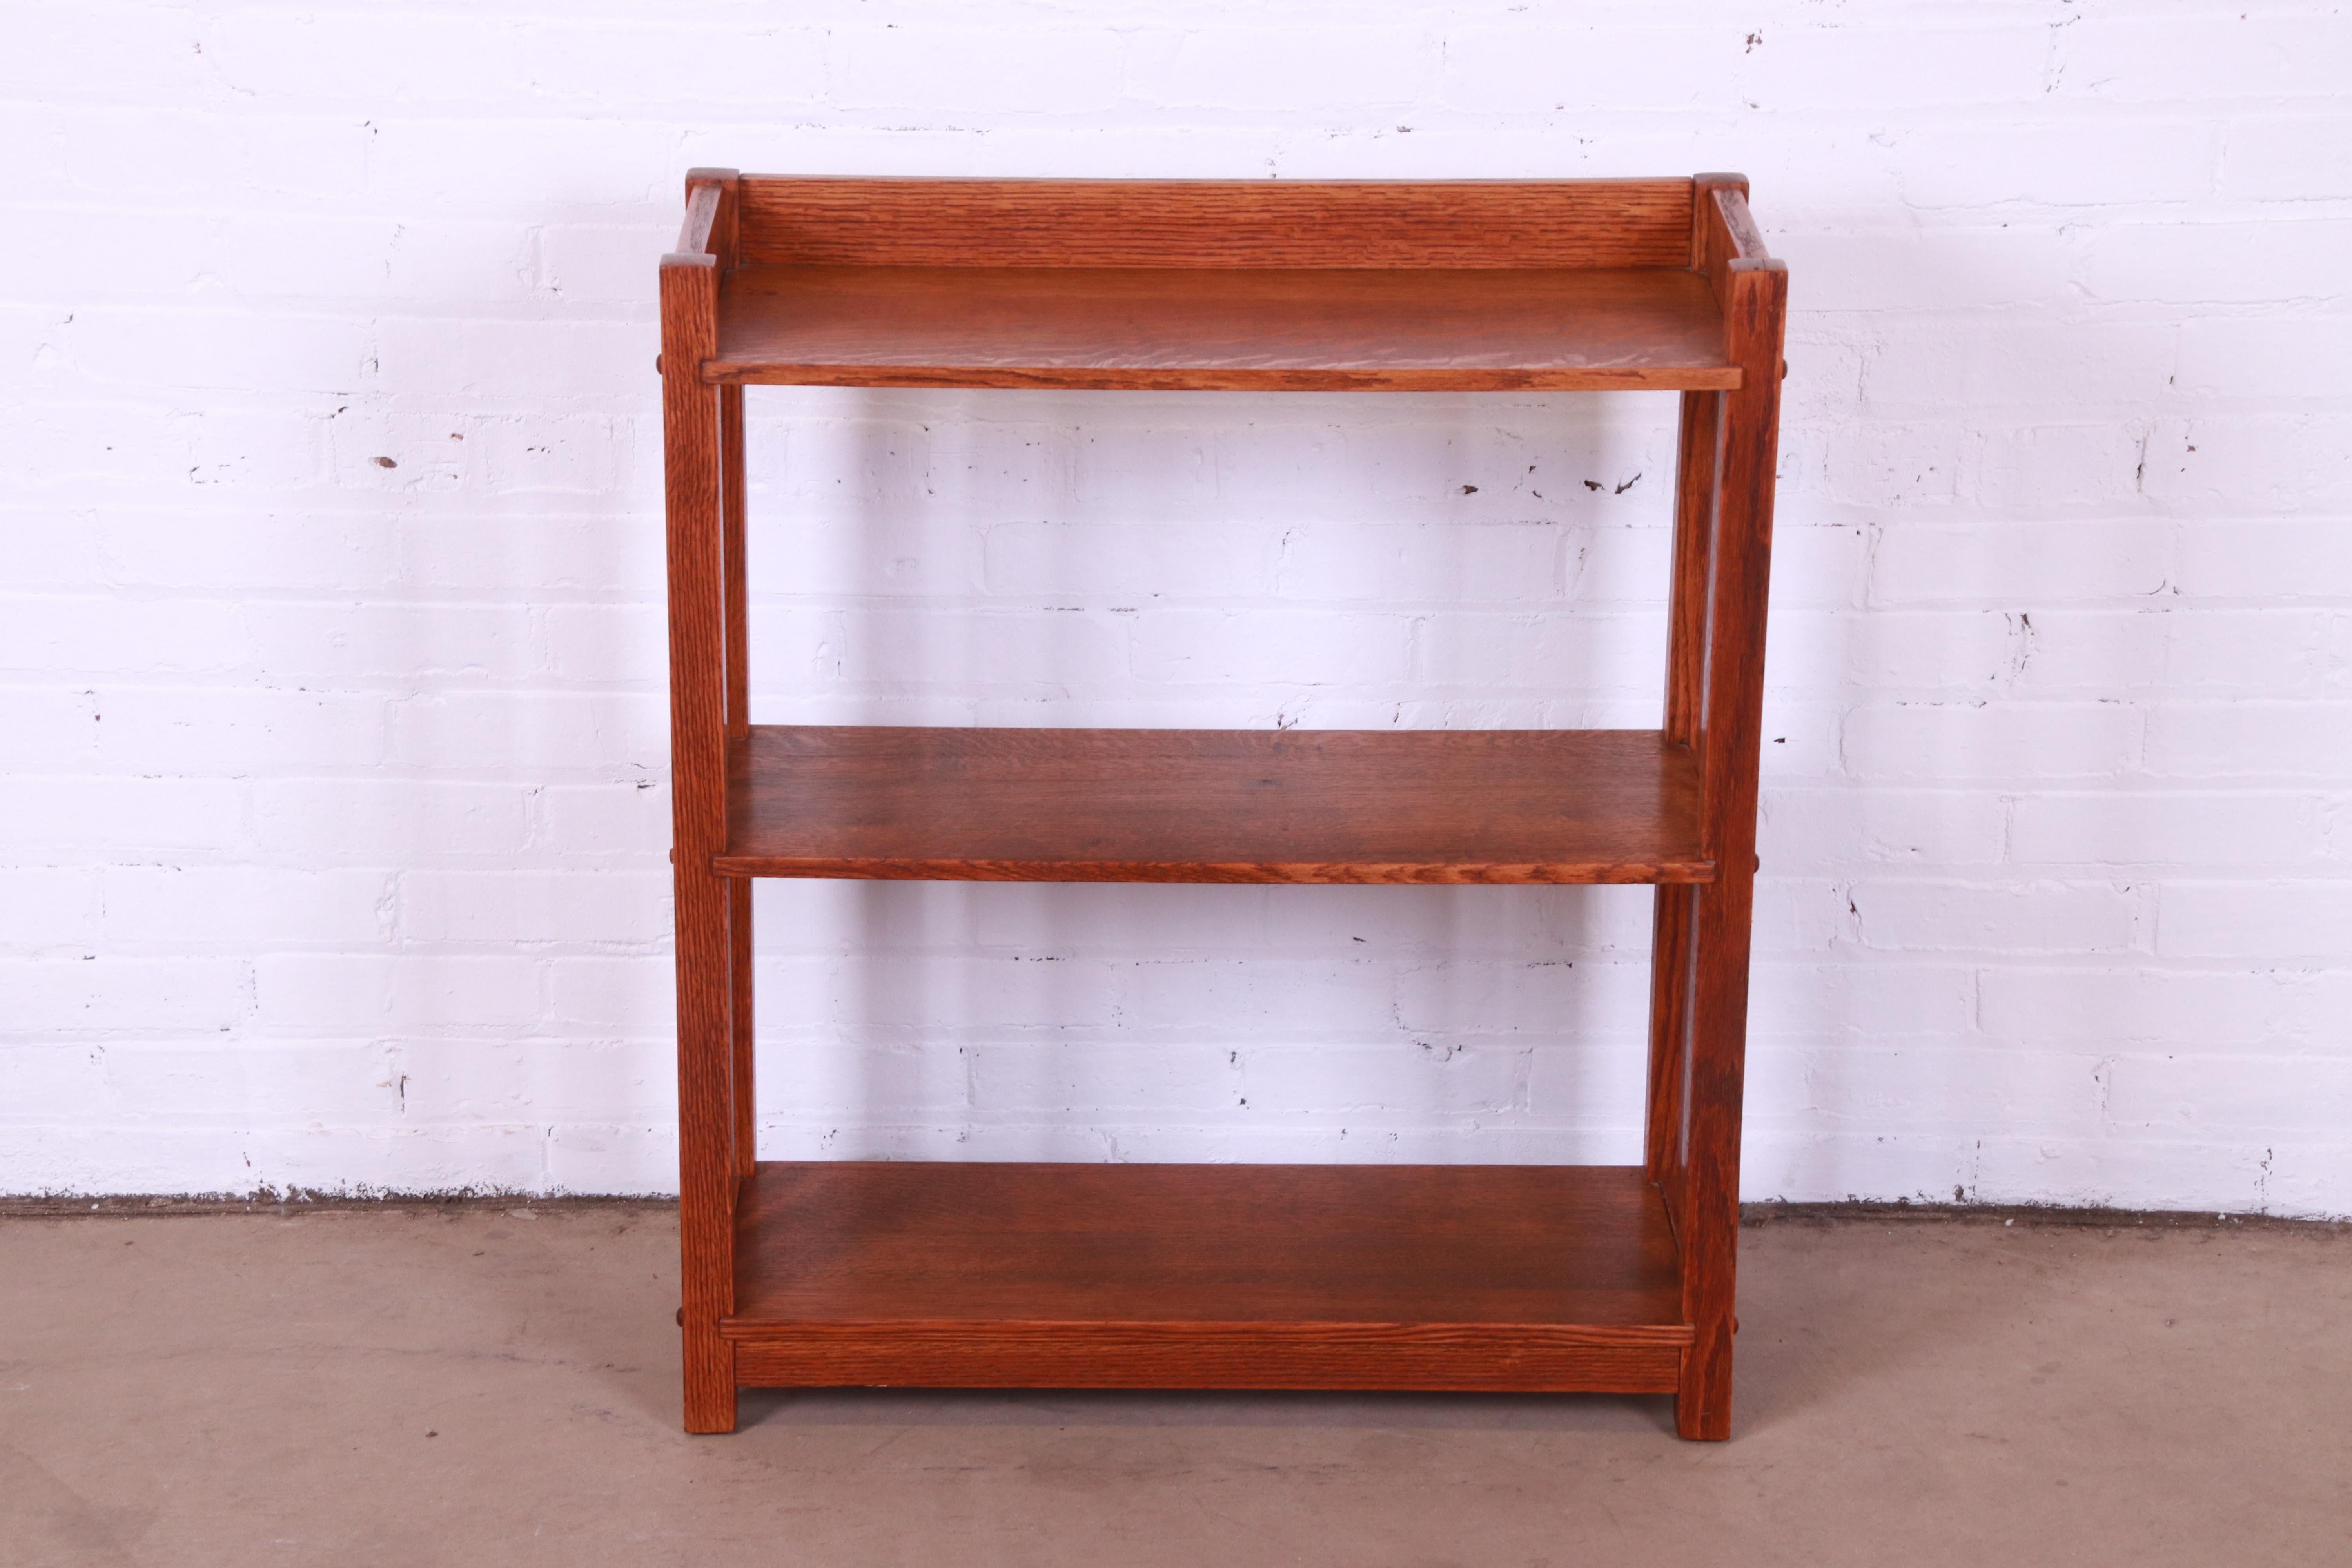 A beautiful antique Arts & Crafts Mission quarter sawn oak bookcase

Recently procured from Frank Lloyd Wright's DeRhodes House

By The Lakeside Craft Shops

USA, Circa 1900

Measures: 28